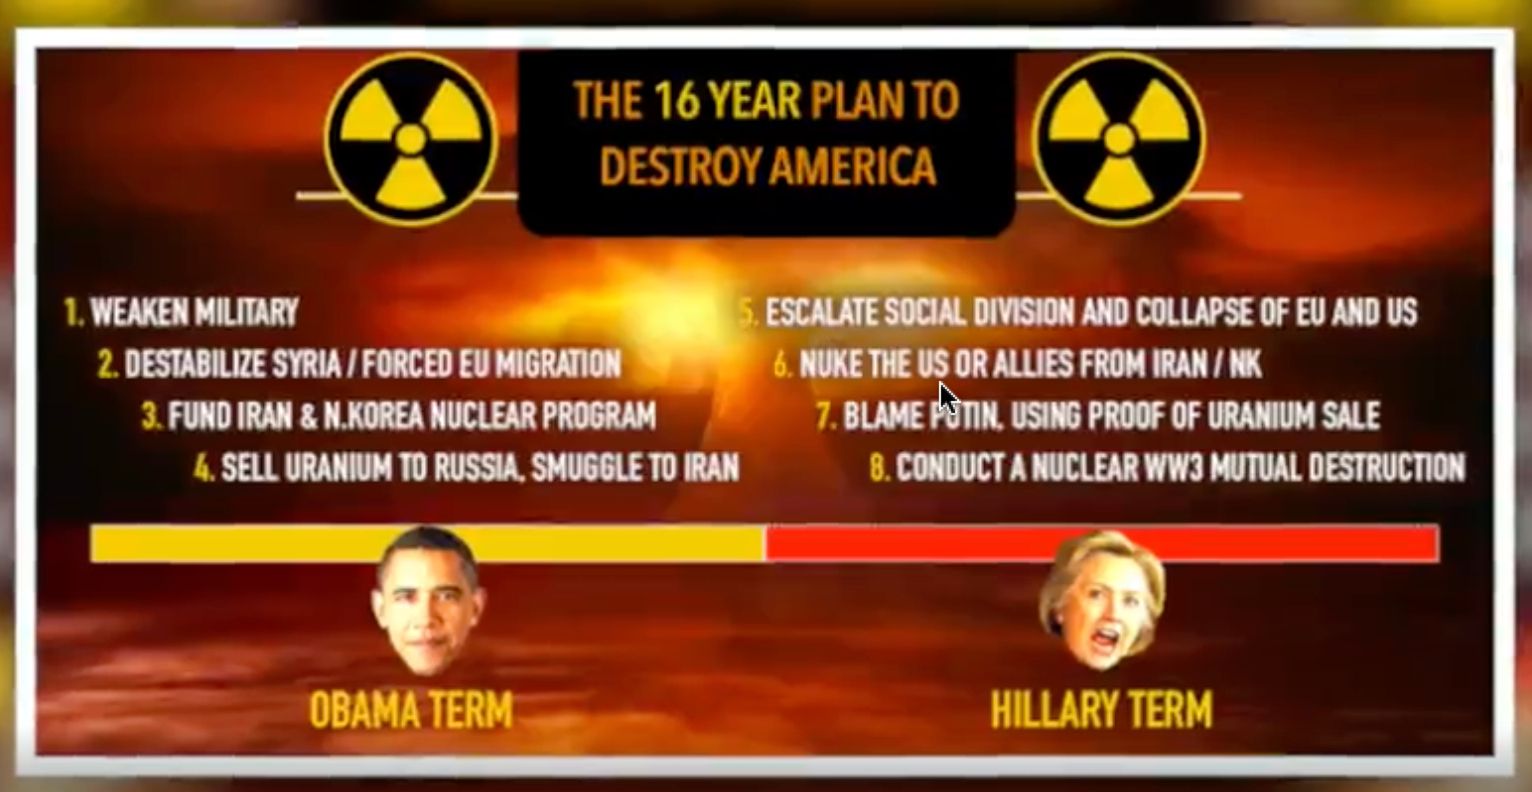 A slide showing ‘The 16 year plan to destroy America’, half taking place in Obama’s term and half in Hillary Clinton’s term. 1. Weaken military 2. Destabilise Syria/Forced EU migration 3. Fund Iran & N. Korea Nuclear program 4. Sell Uranium to Russia, smuggle to Iran 5. Escalate social division and collapse of EU and US 6. Nuke the US or allies from Iran/NK 7. Blame Putin, Using Proof of Uranium Sale 8. Conduct a Nuclear WW3 Mutual destruction.